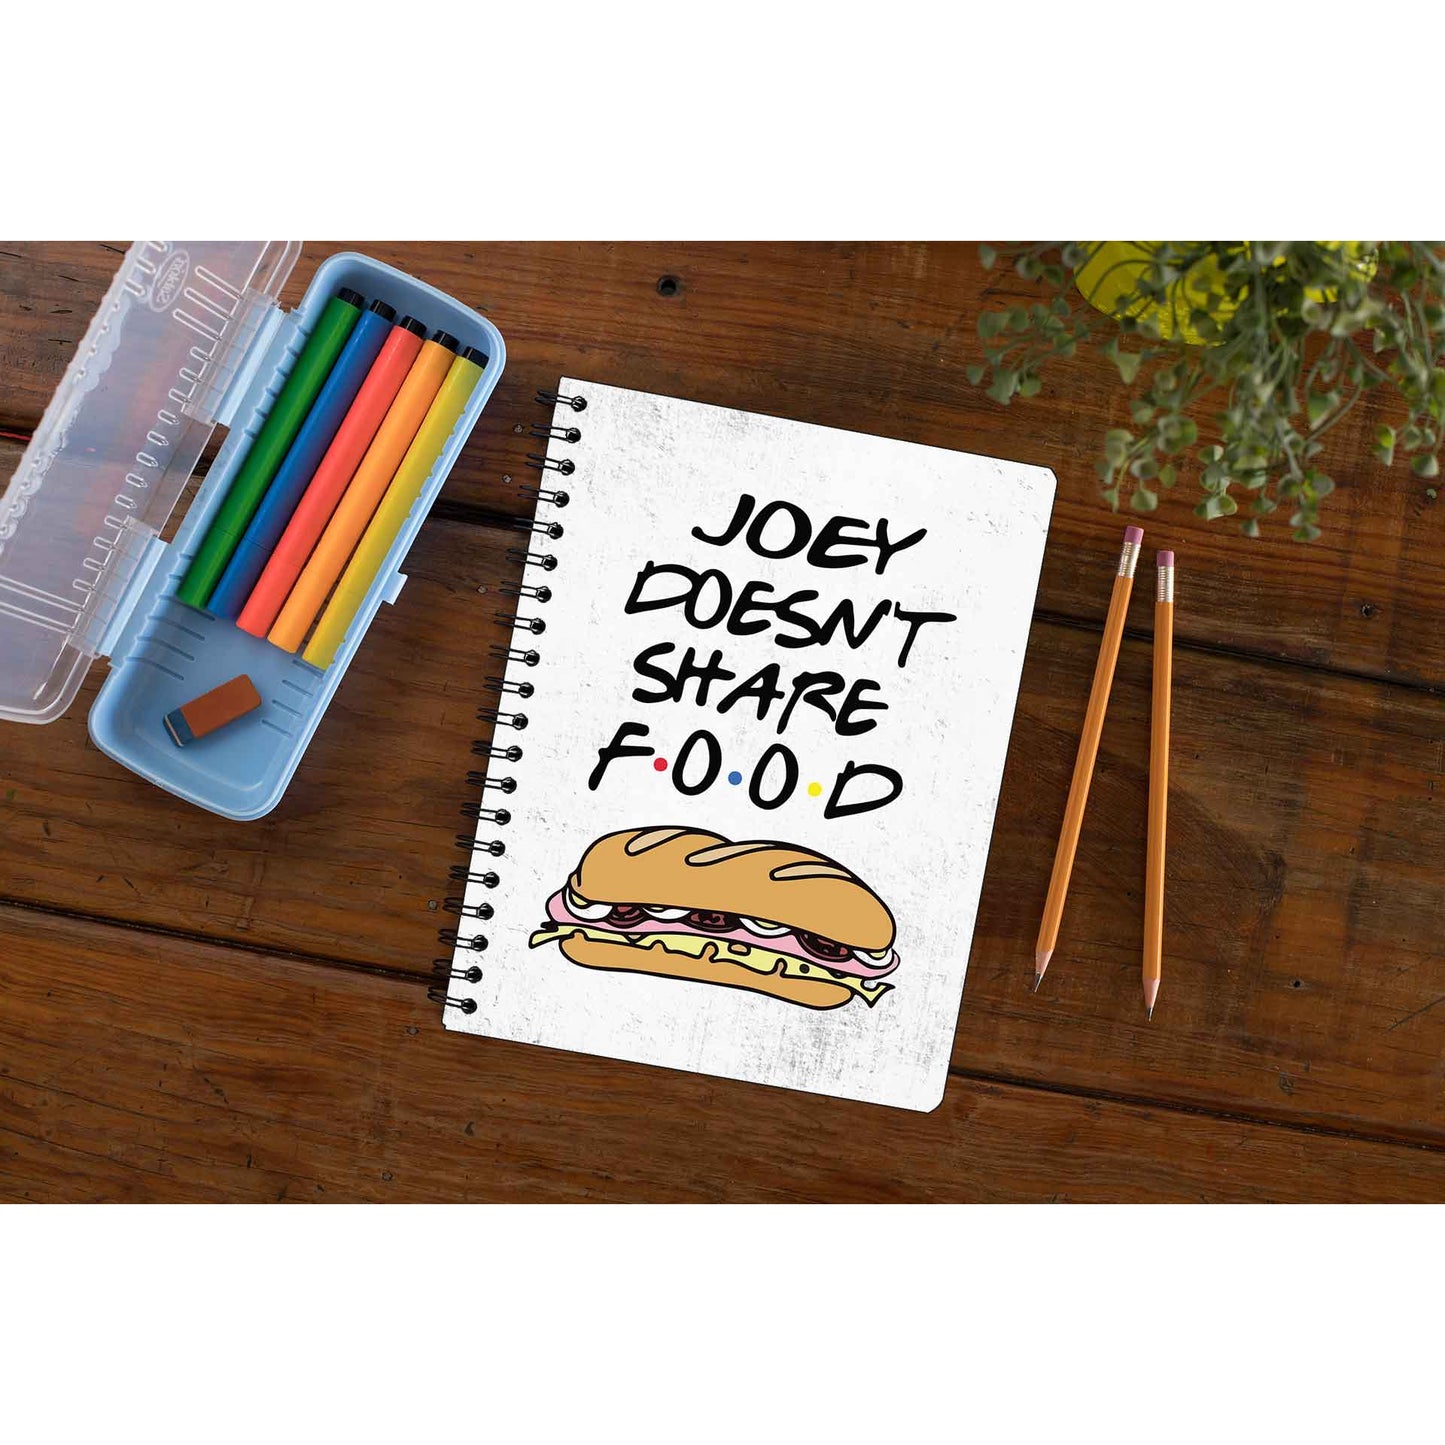 Friends Notebook - Joey Doesn't Share Food The Banyan Tee TBT